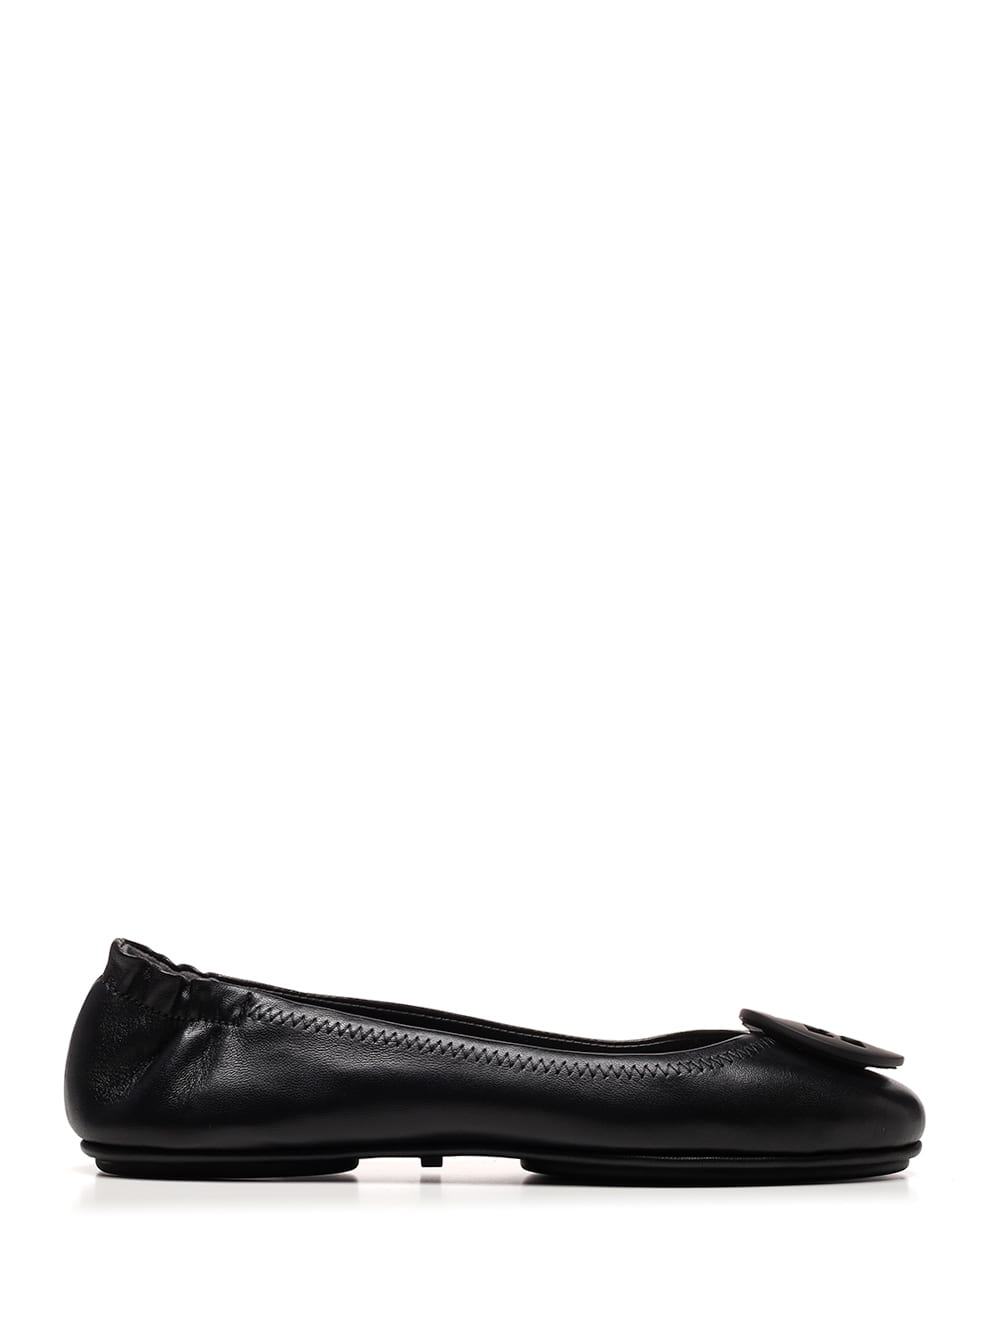 Tory Burch Minnie Ballet Flat Flat Shoes In Nero